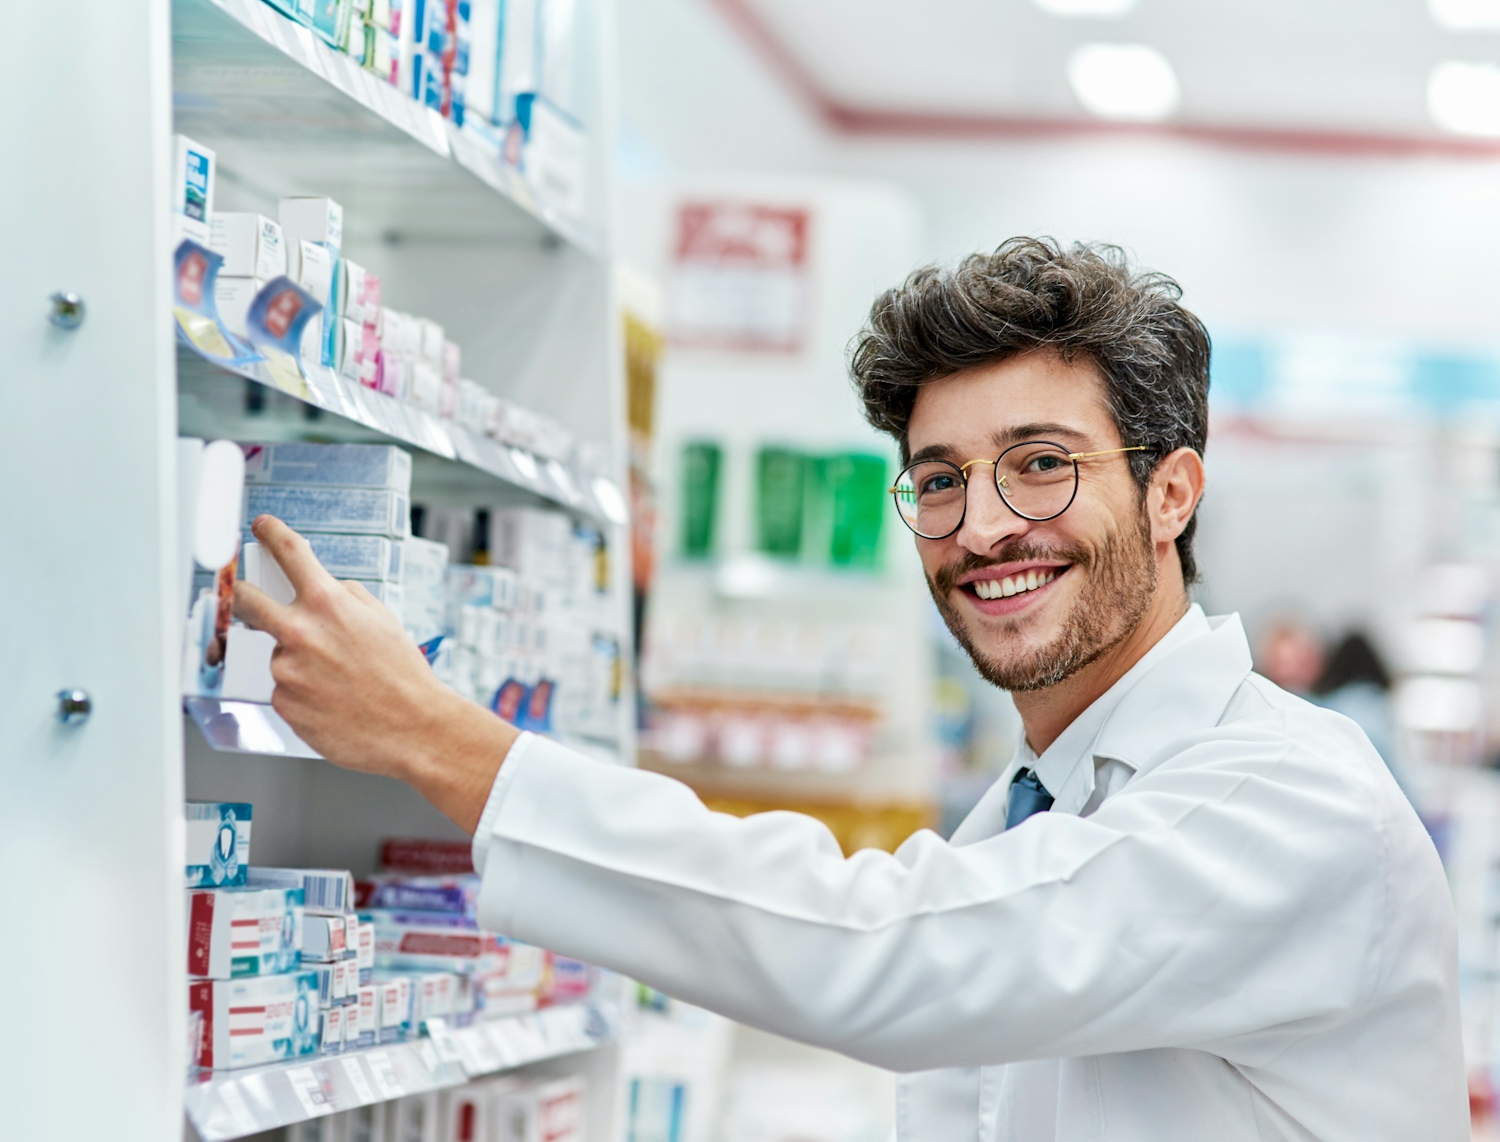 Brunette man working behind the counter at the pharmacy